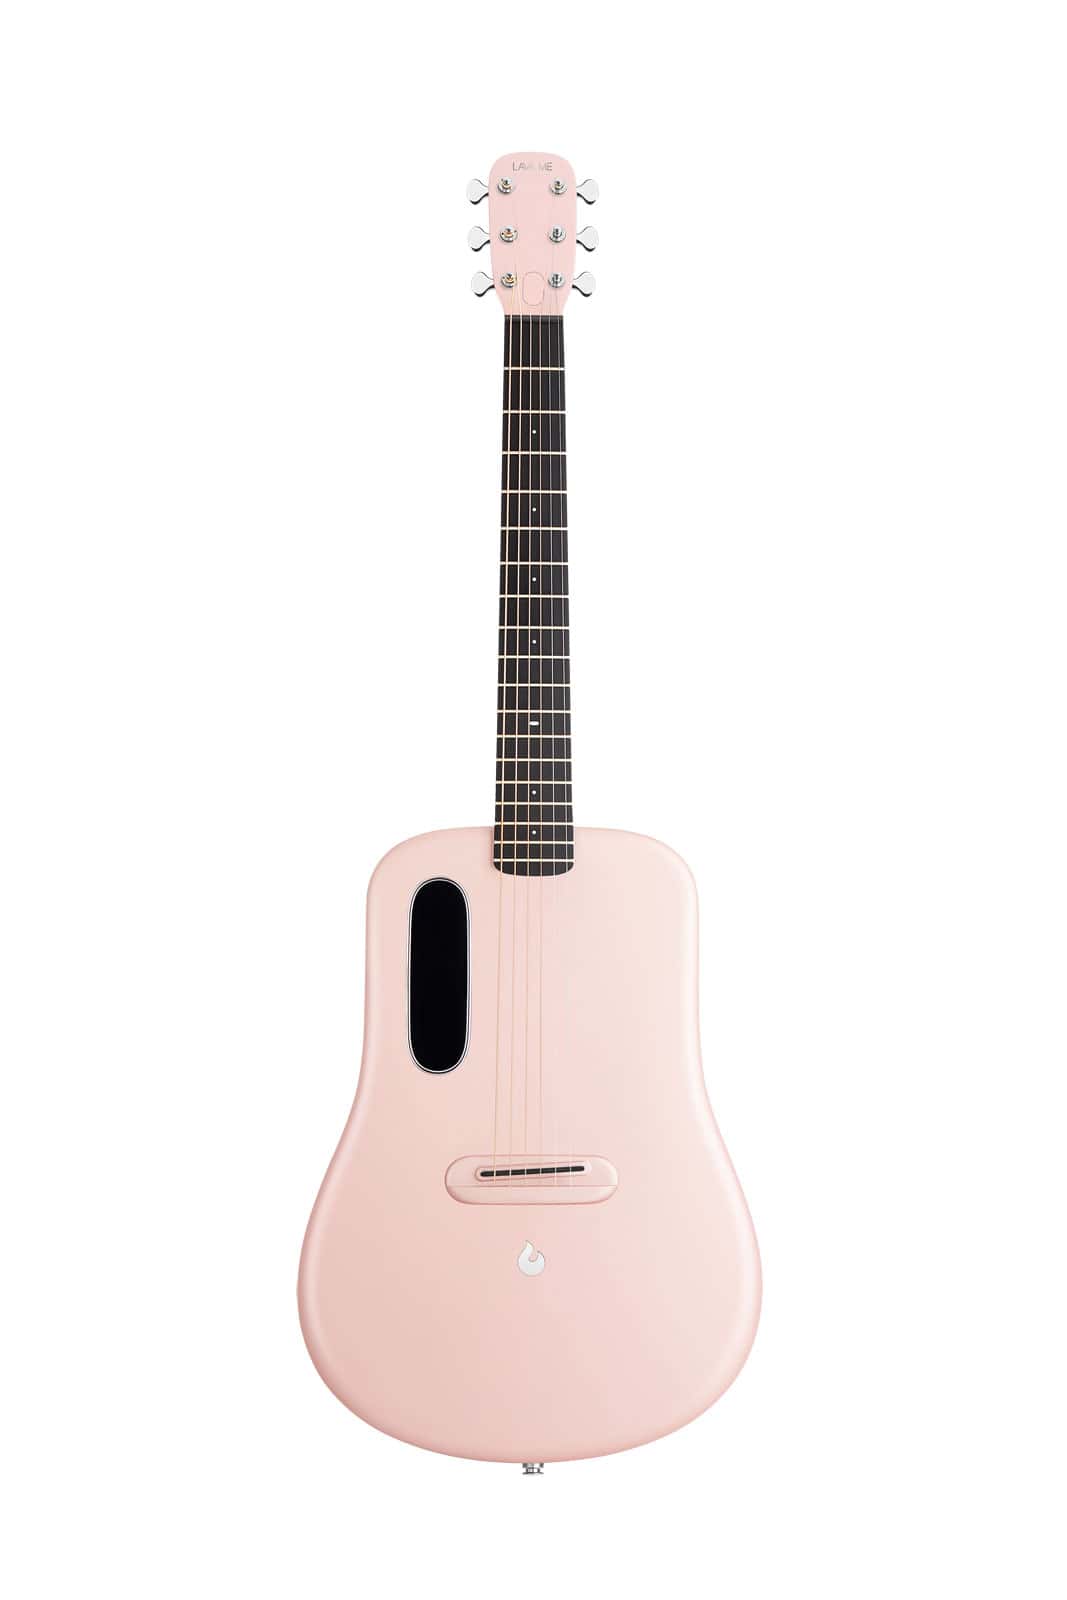 LAVA MUSIC LAVA ME 4 CARBON SERIES 38'' PINK - WITH SPACE BAG - B-STOCK